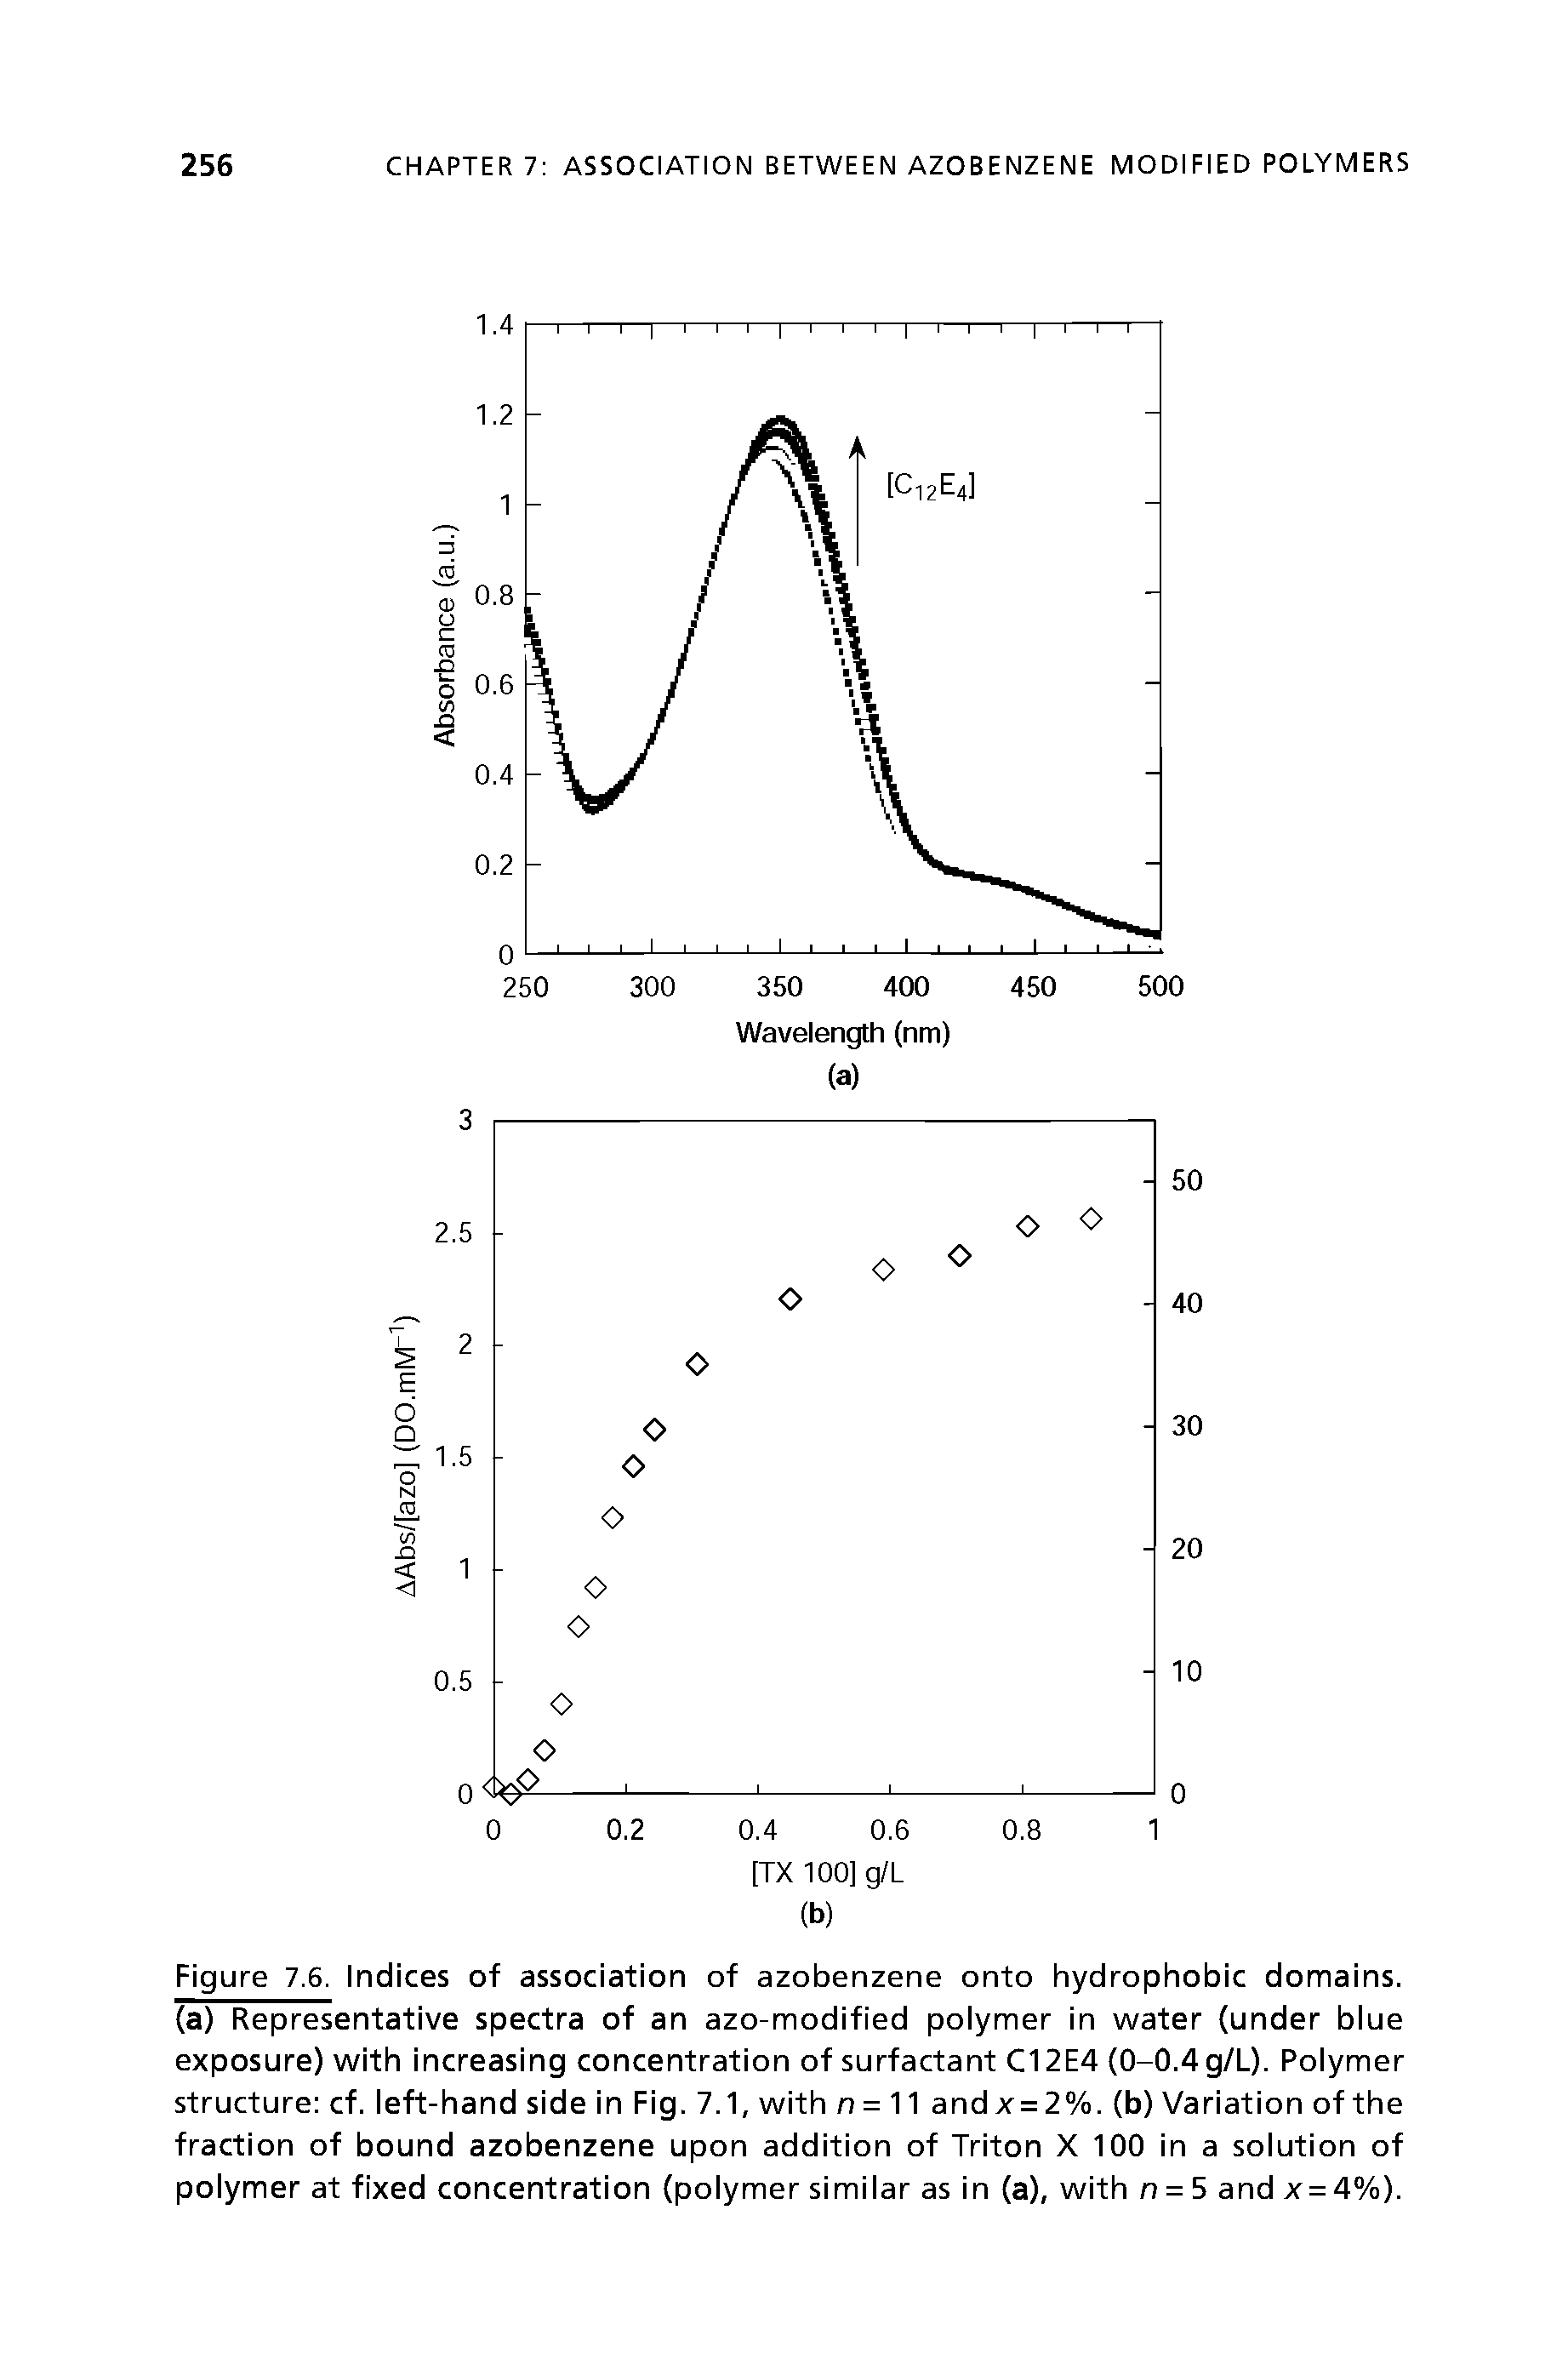 Figure 7.6. Indices of association of azobenzene onto hydrophobic domains, (a) Representative spectra of an azo-modified polymer in water (under blue exposure) with increasing concentration of surfactant Cl 2E4 (0-0.4 g/L). Polymer structure cf. left-hand side in Fig. 7.1, with n = 11 andx = 2%. (b) Variation of the fraction of bound azobenzene upon addition of Triton X 100 in a solution of polymer at fixed concentration (polymer similar as in (a), with n = 5 and x = 4%).